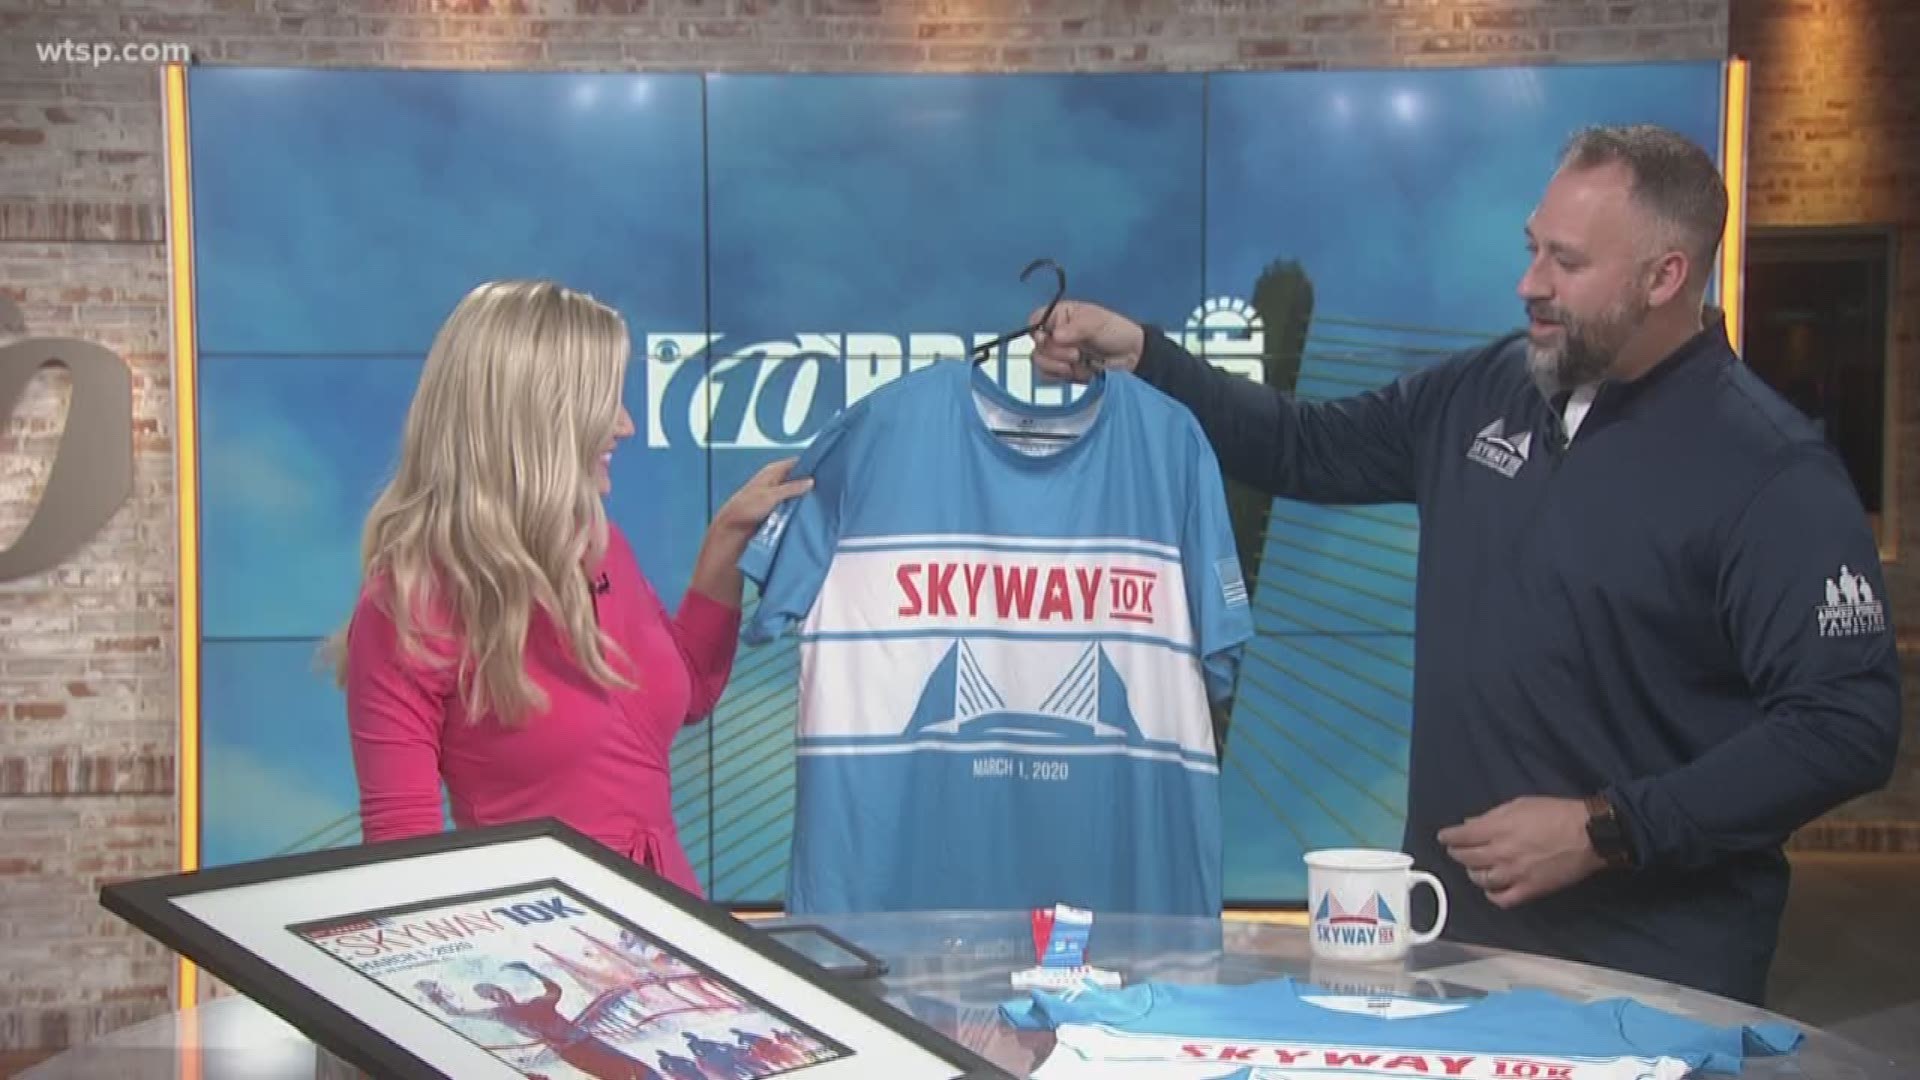 James Judge was on 10News Brightside to talk about the Skyway 10k that is on Sunday, March 1.